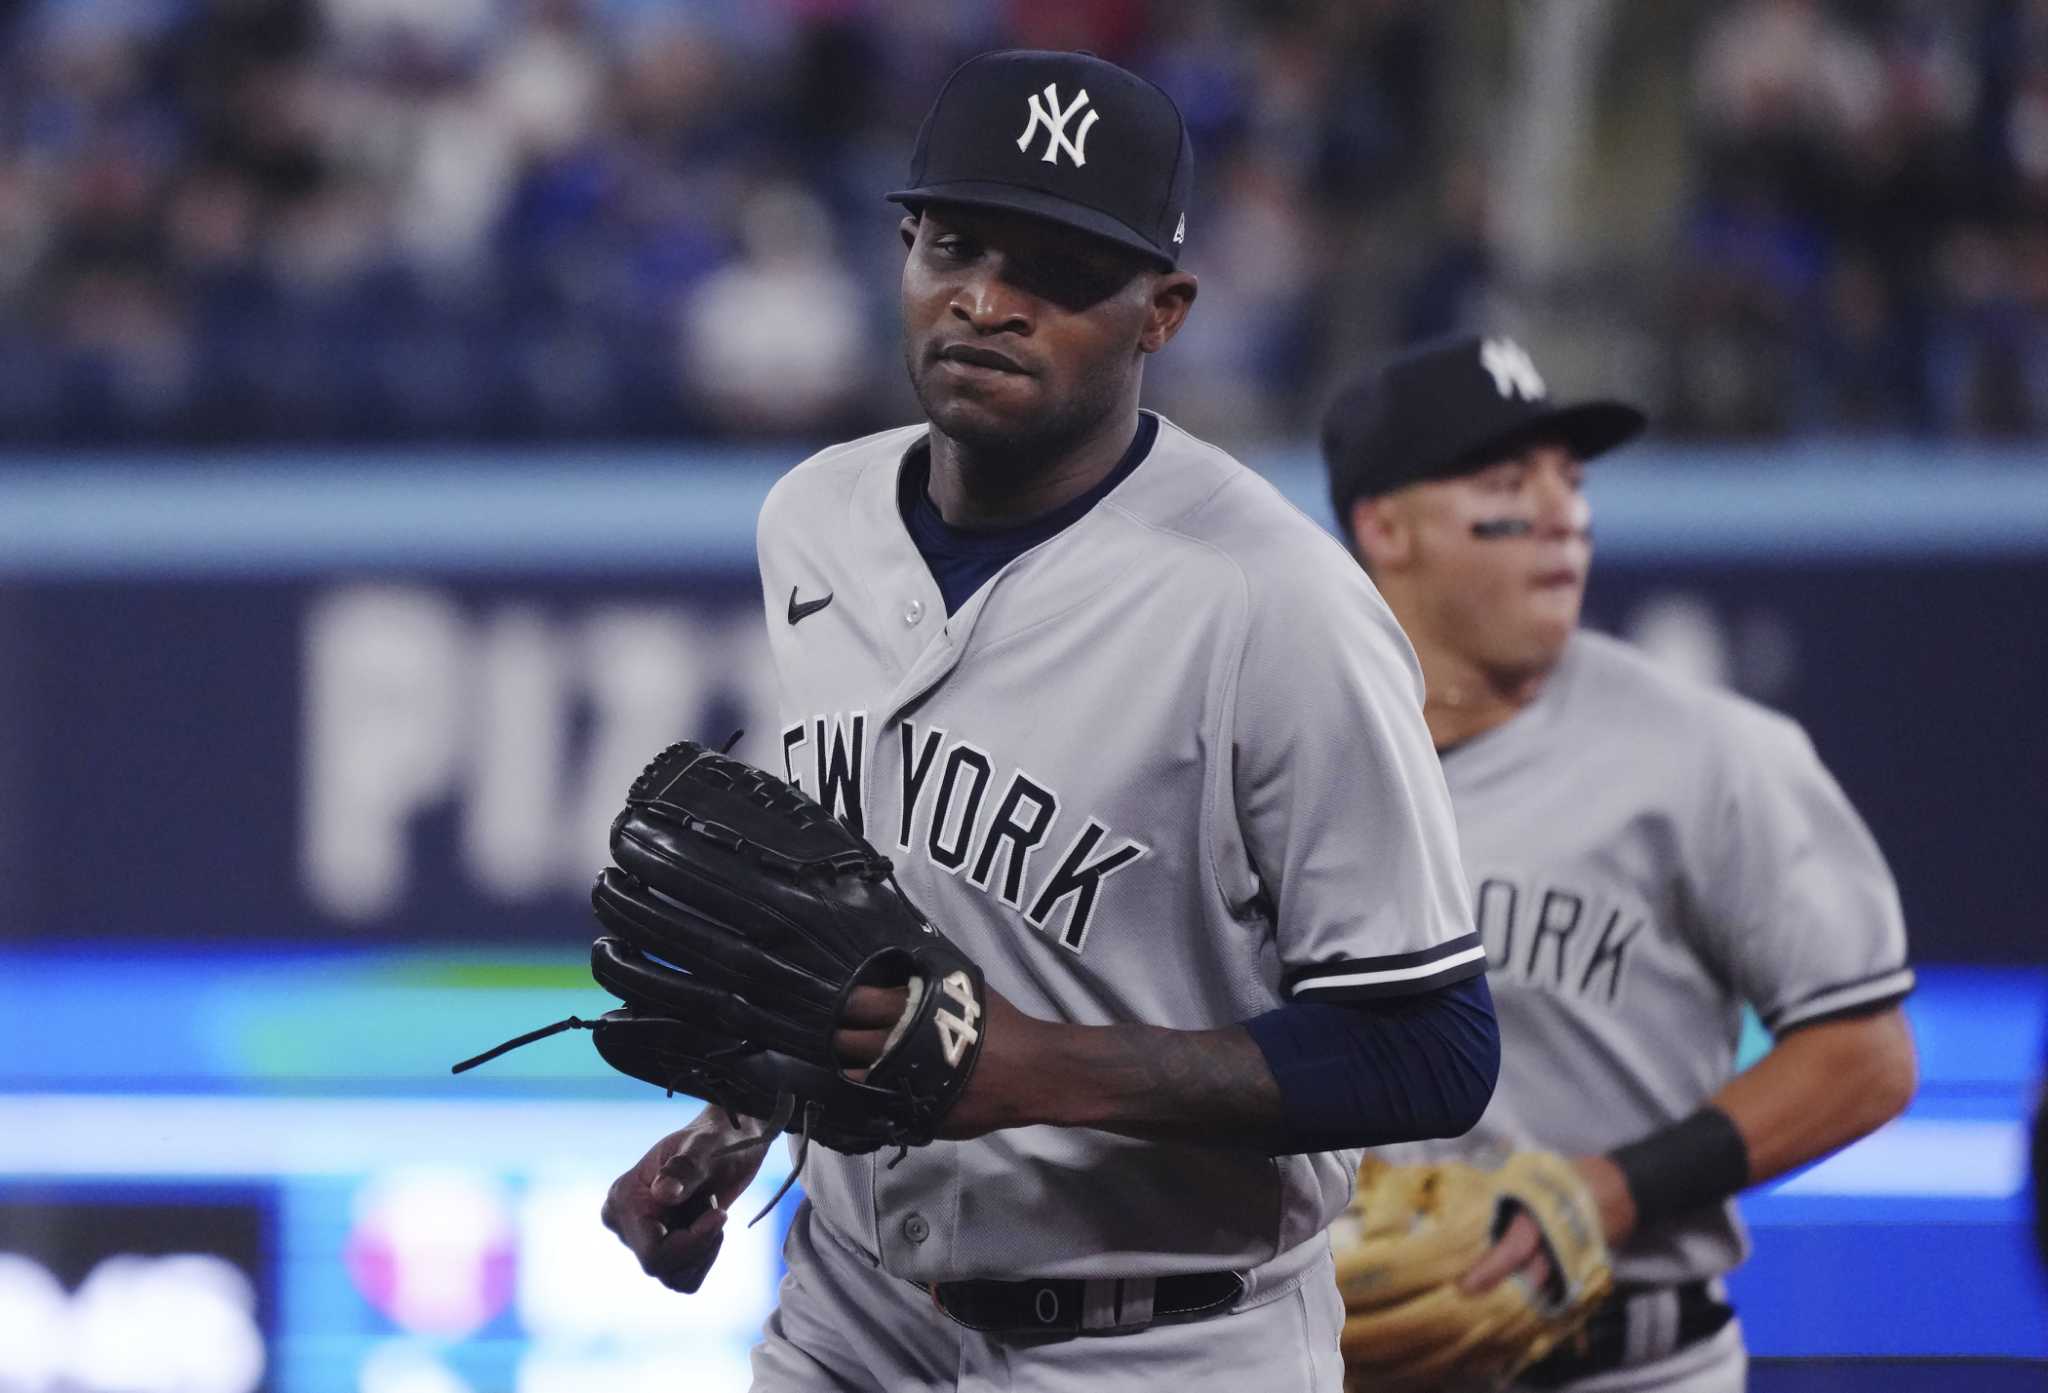 Yankees Domingo German ejected for sticky stuff, Aaron Judge booed